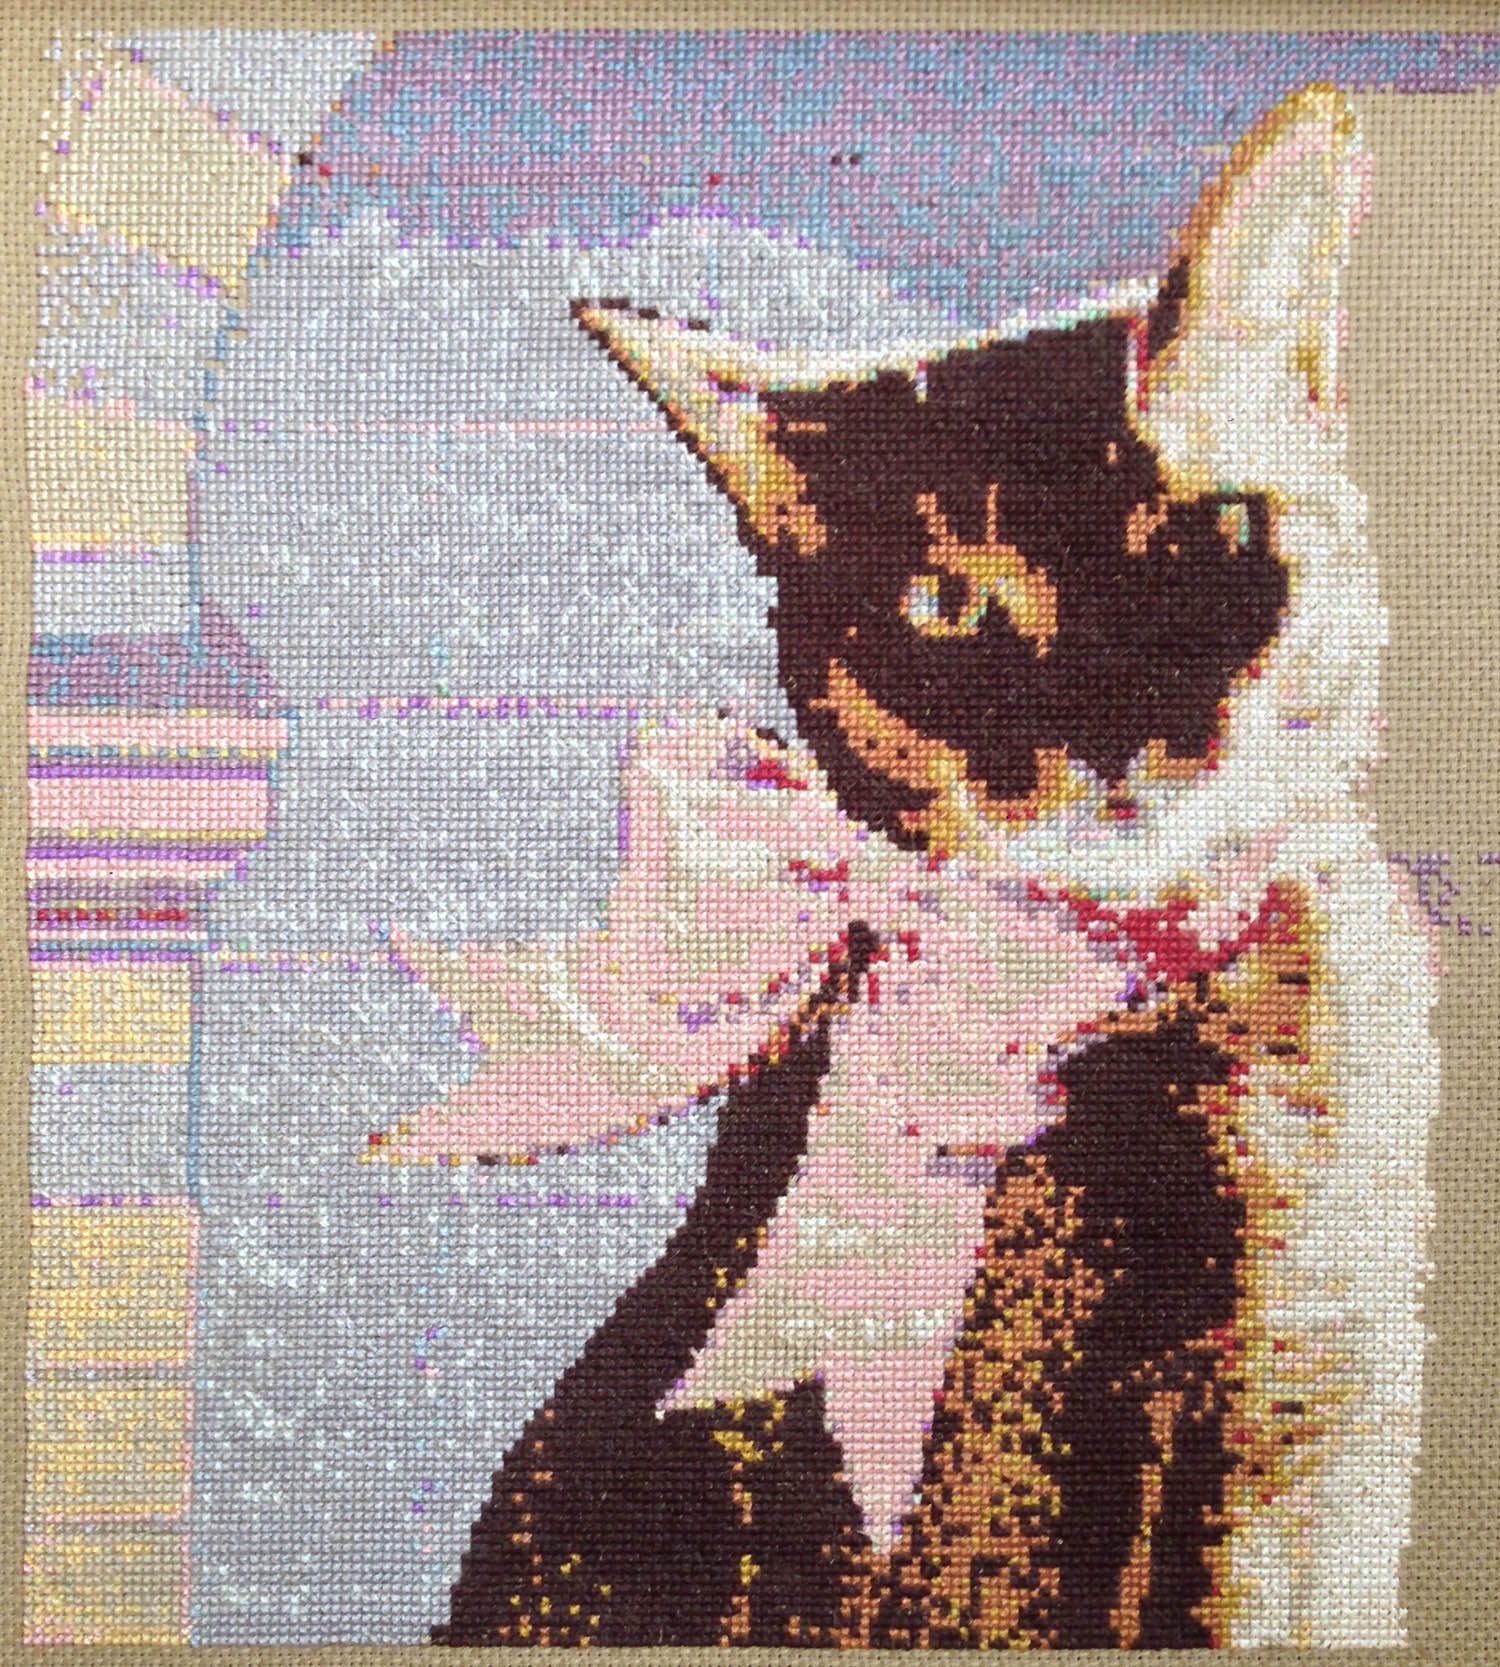 Stitchery from Photo Experiment (Cinnamon, our Cat)